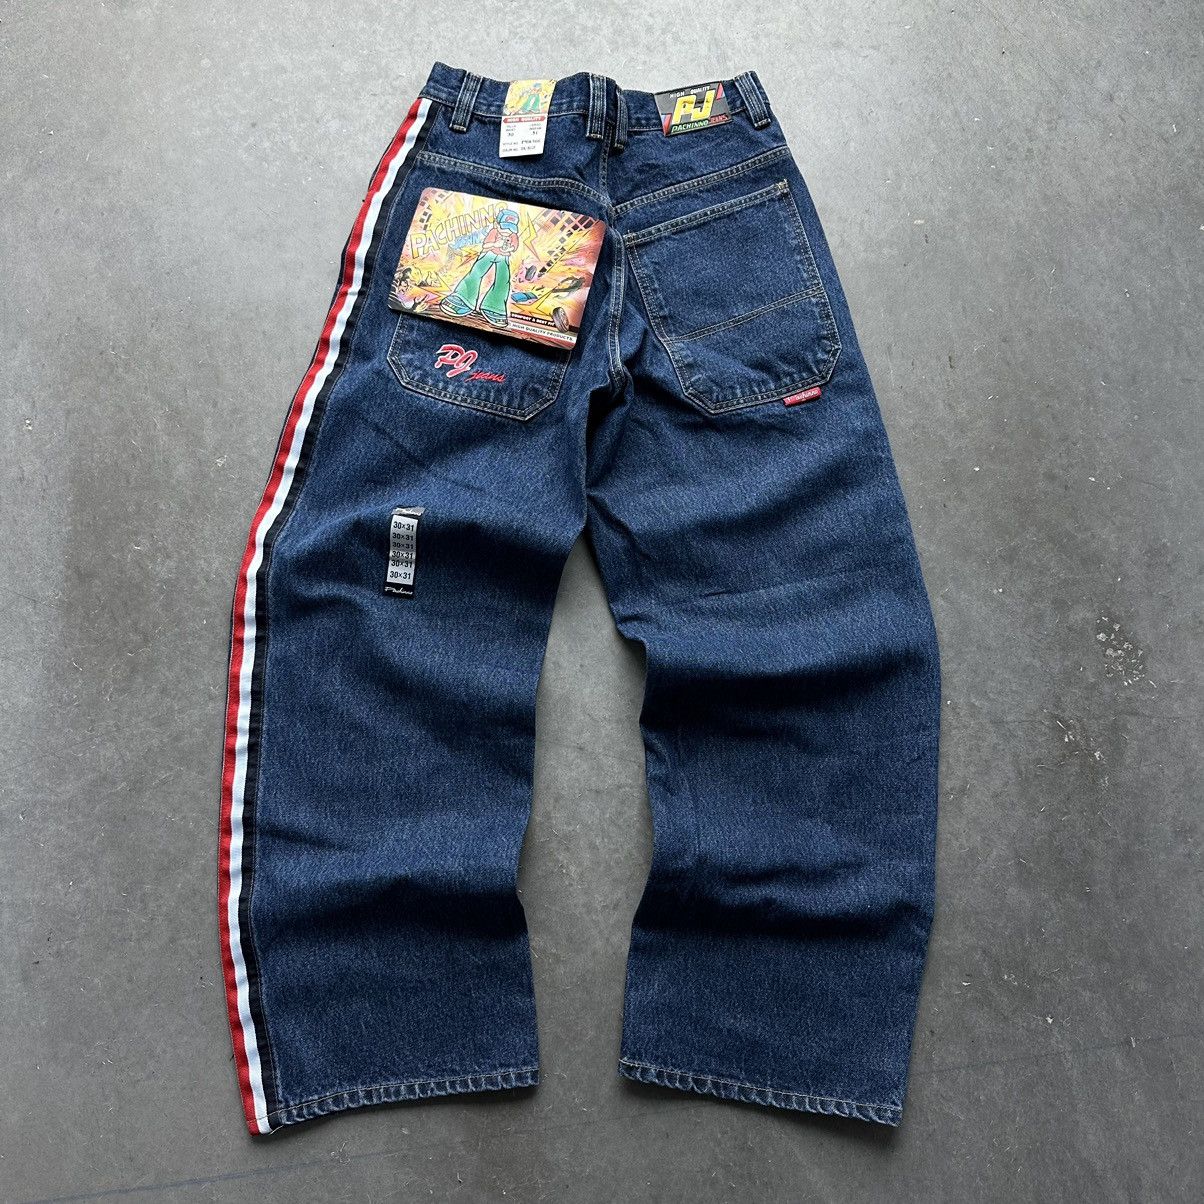 Pre-owned Jnco X Vintage Crazy Vintage Y2k Jnco Style Baggy Jeans Wide Leg Grunge Nwt In Navy